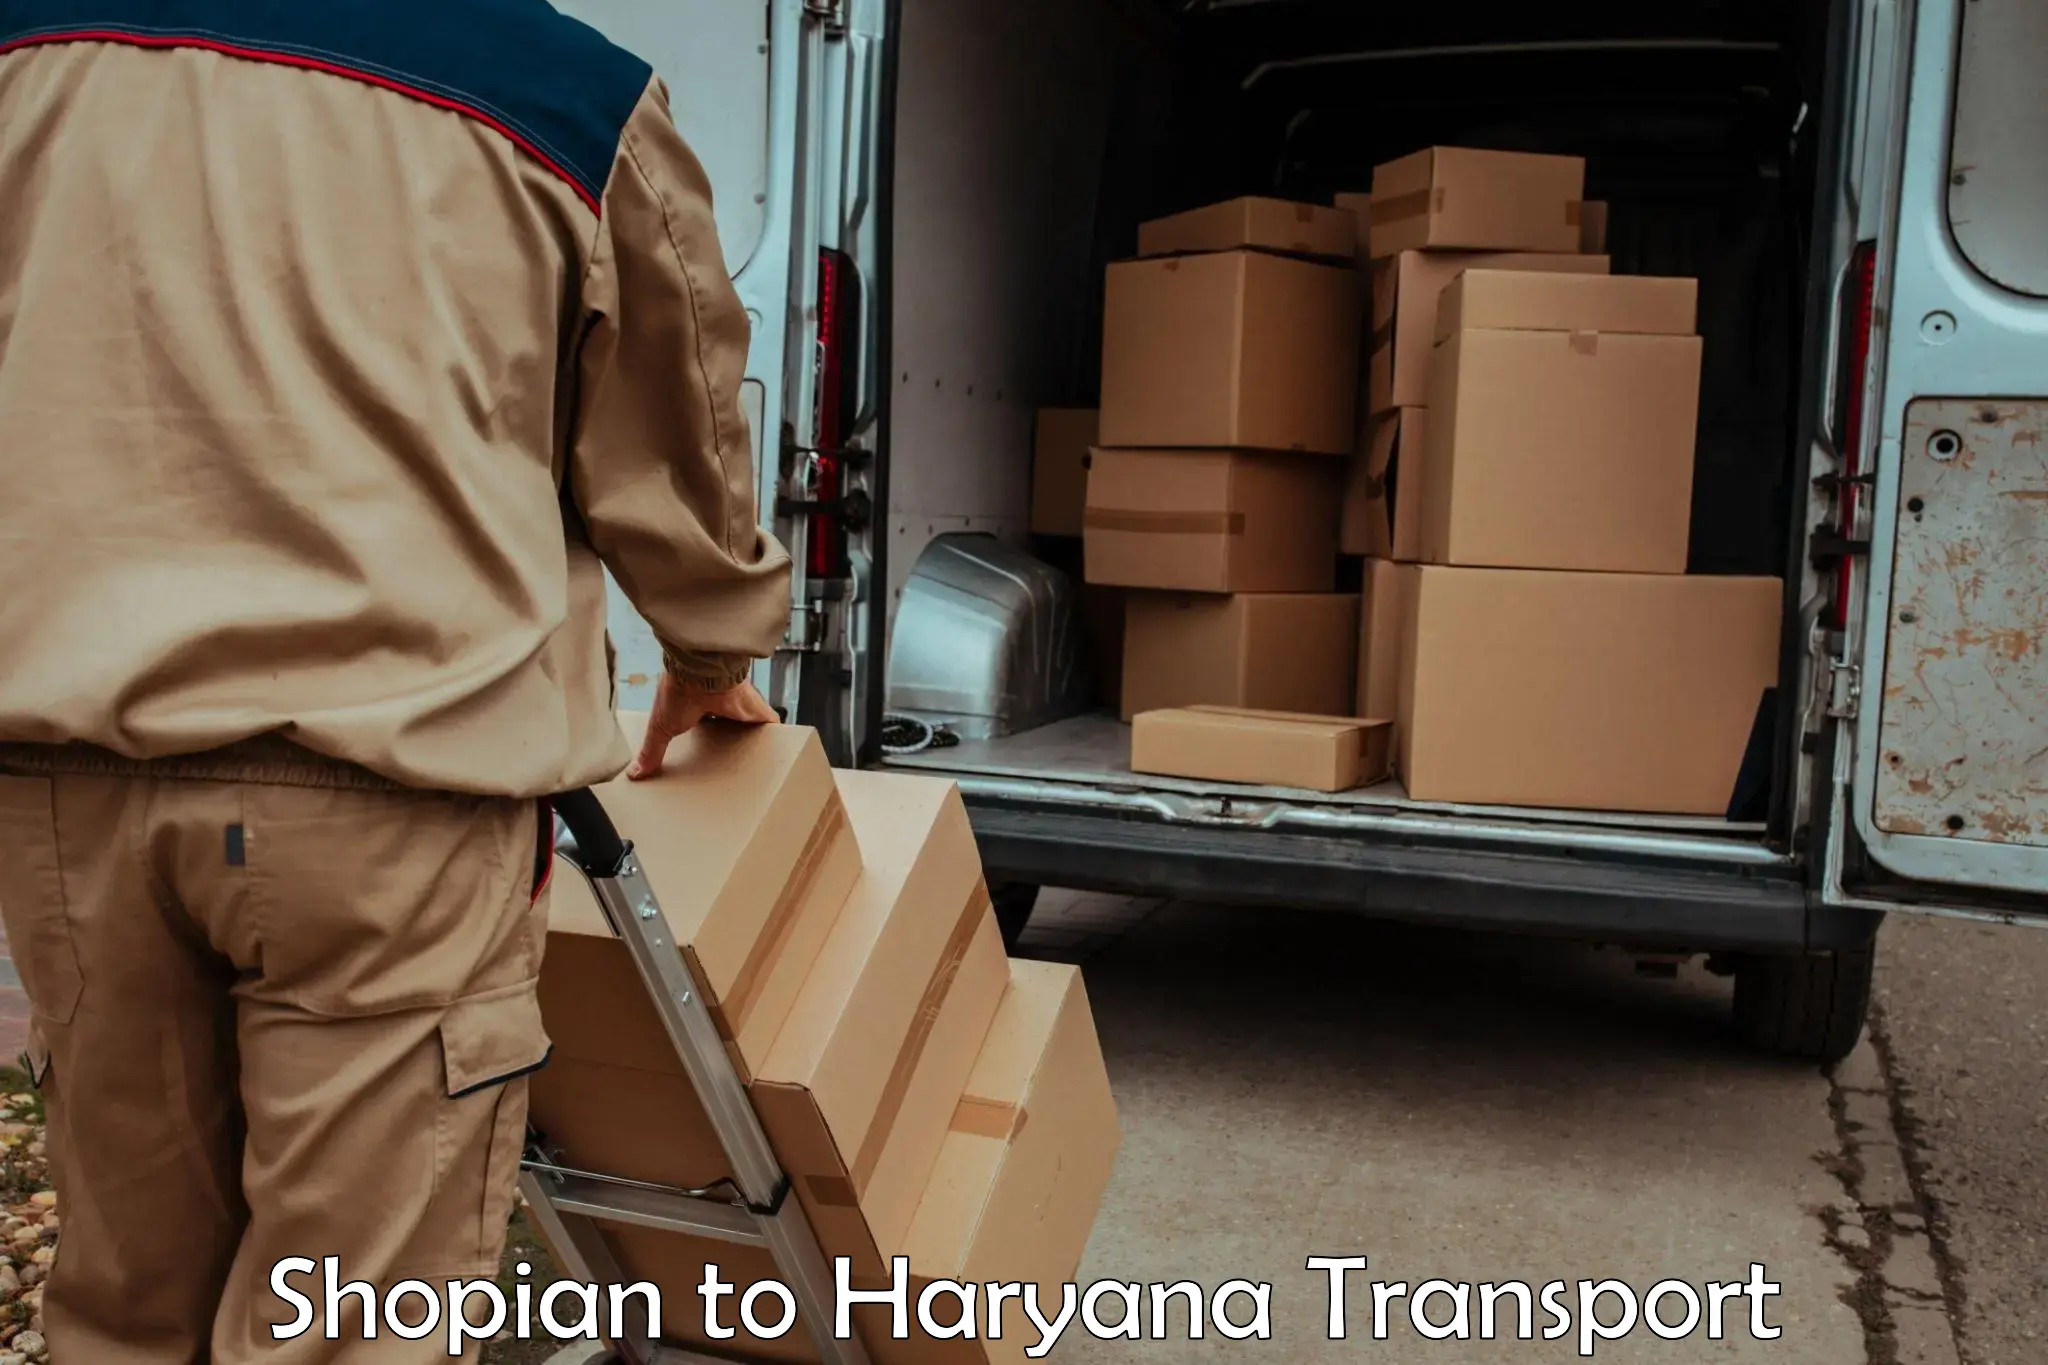 Container transport service Shopian to Haryana